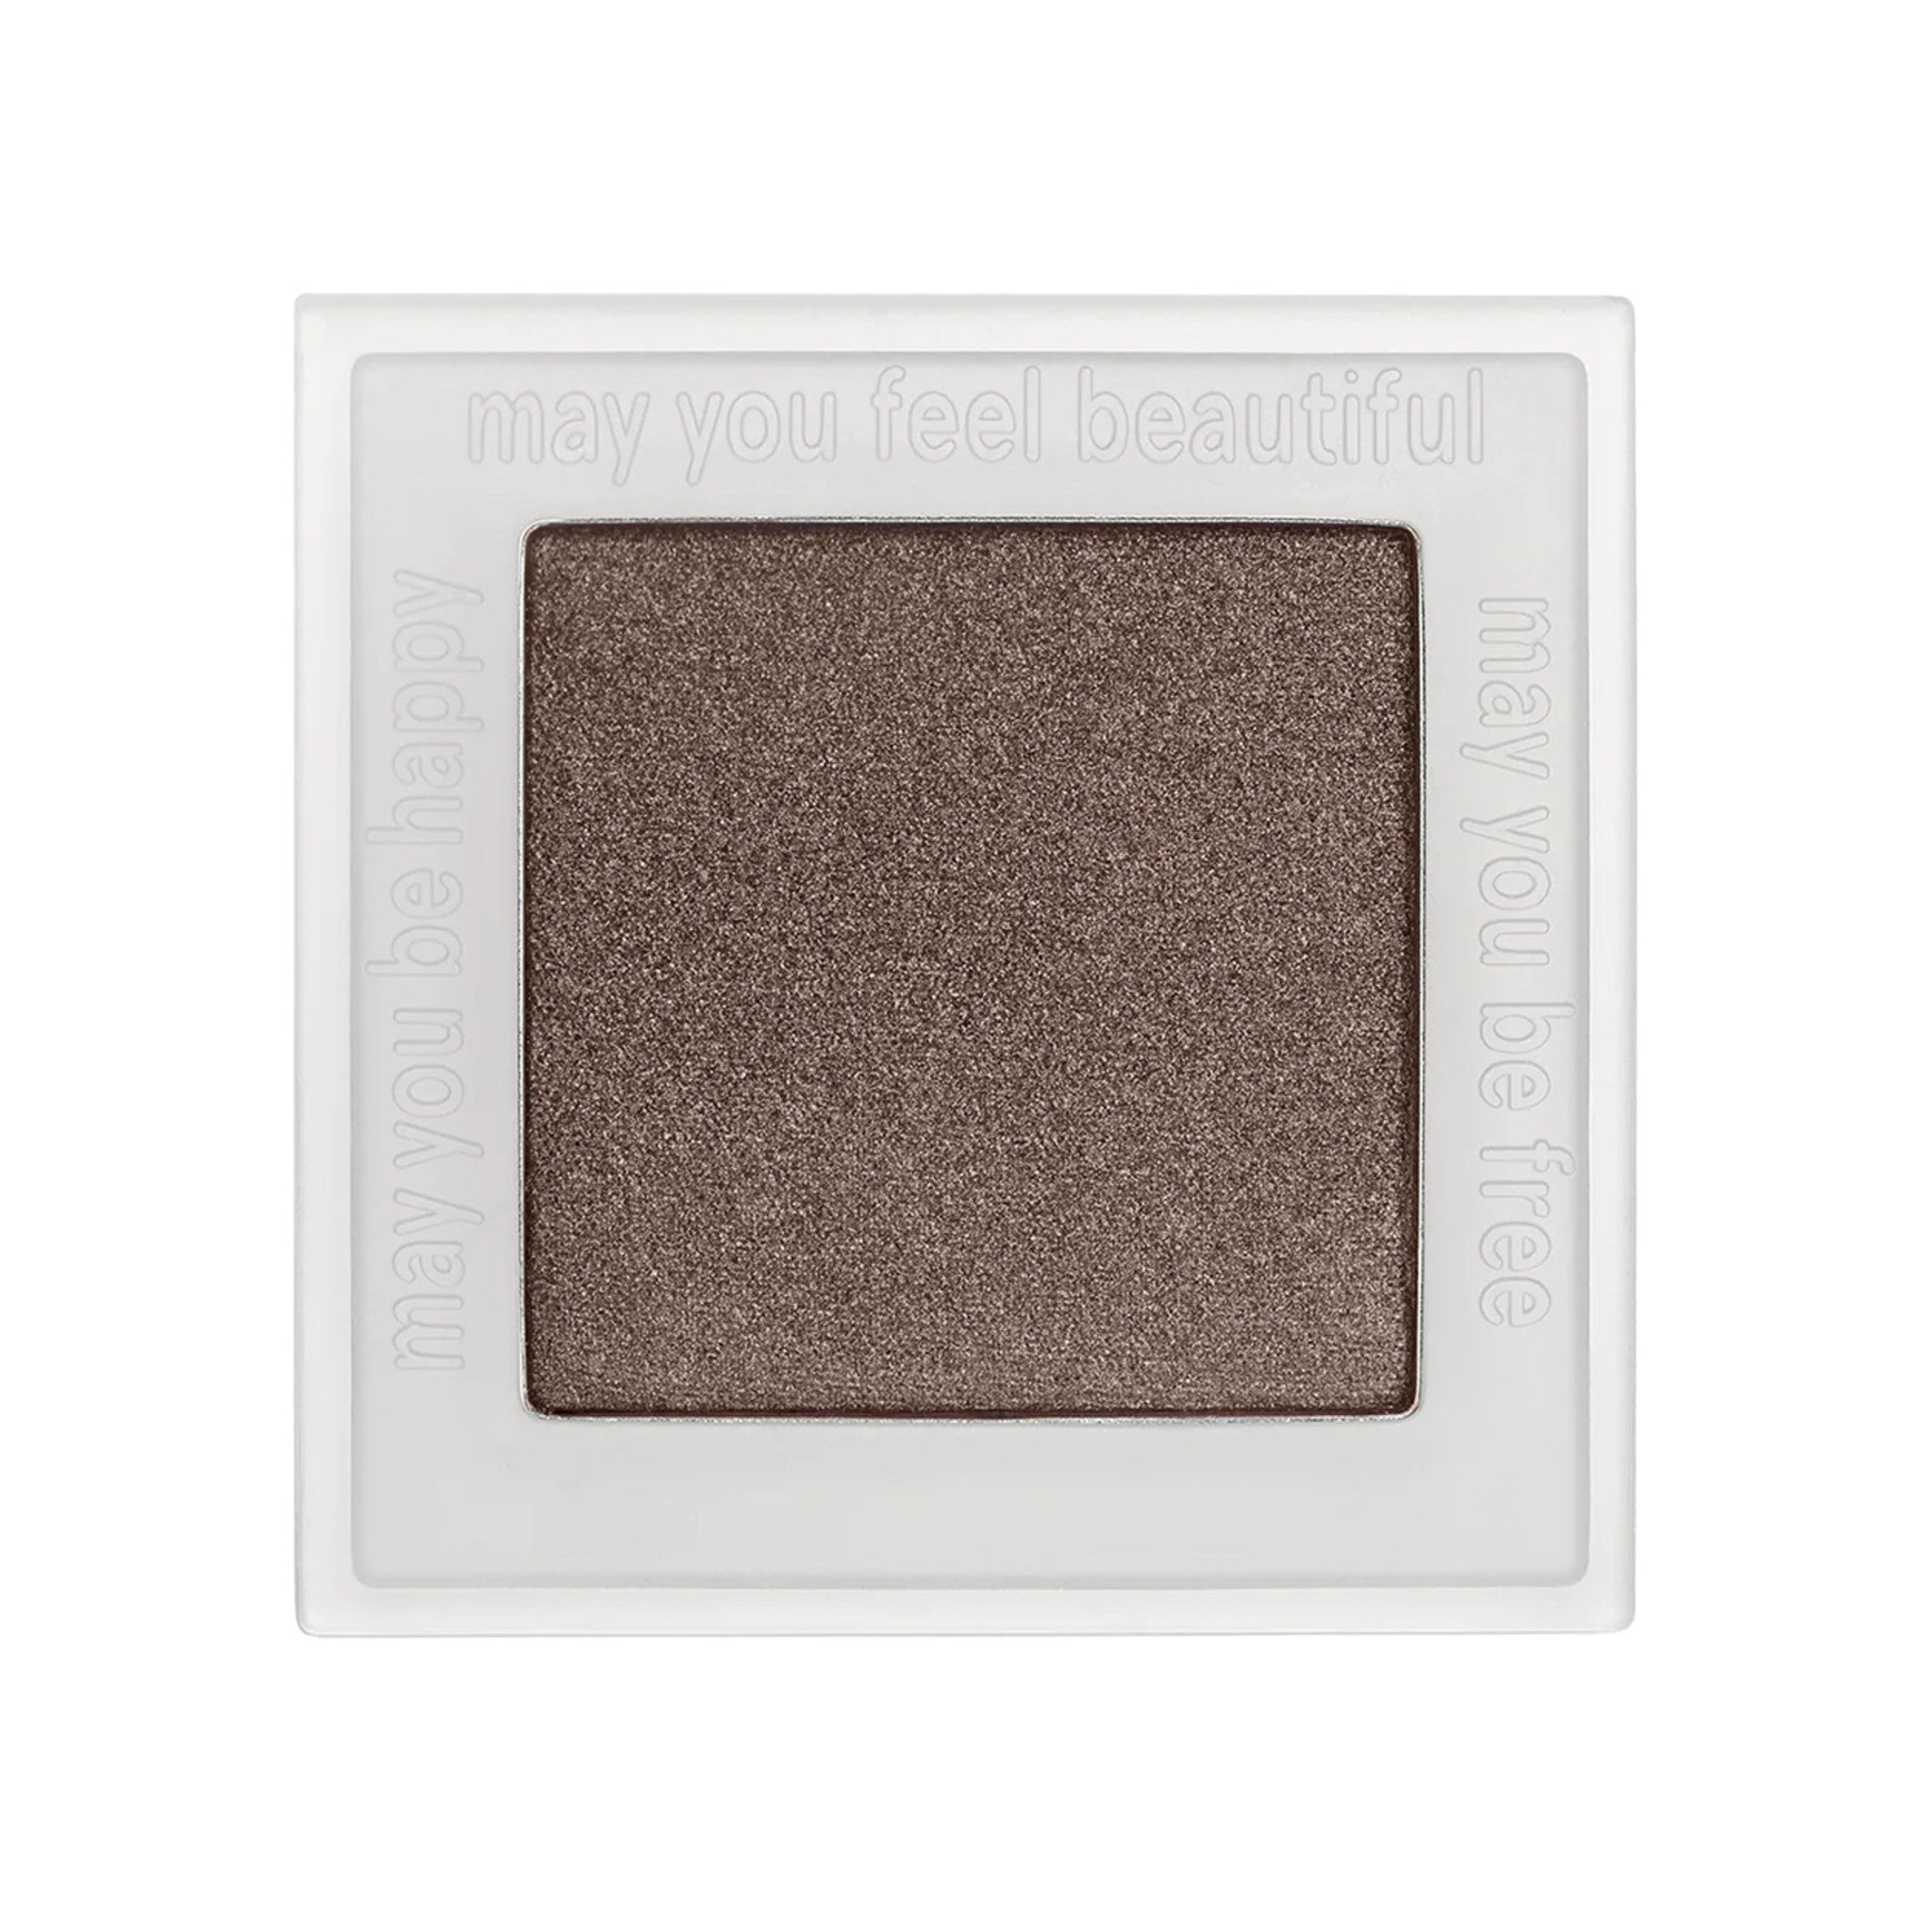 Neen Pretty Shady Pressed Pigment Color/Shade variant: Wish main image. This product is in the color nude